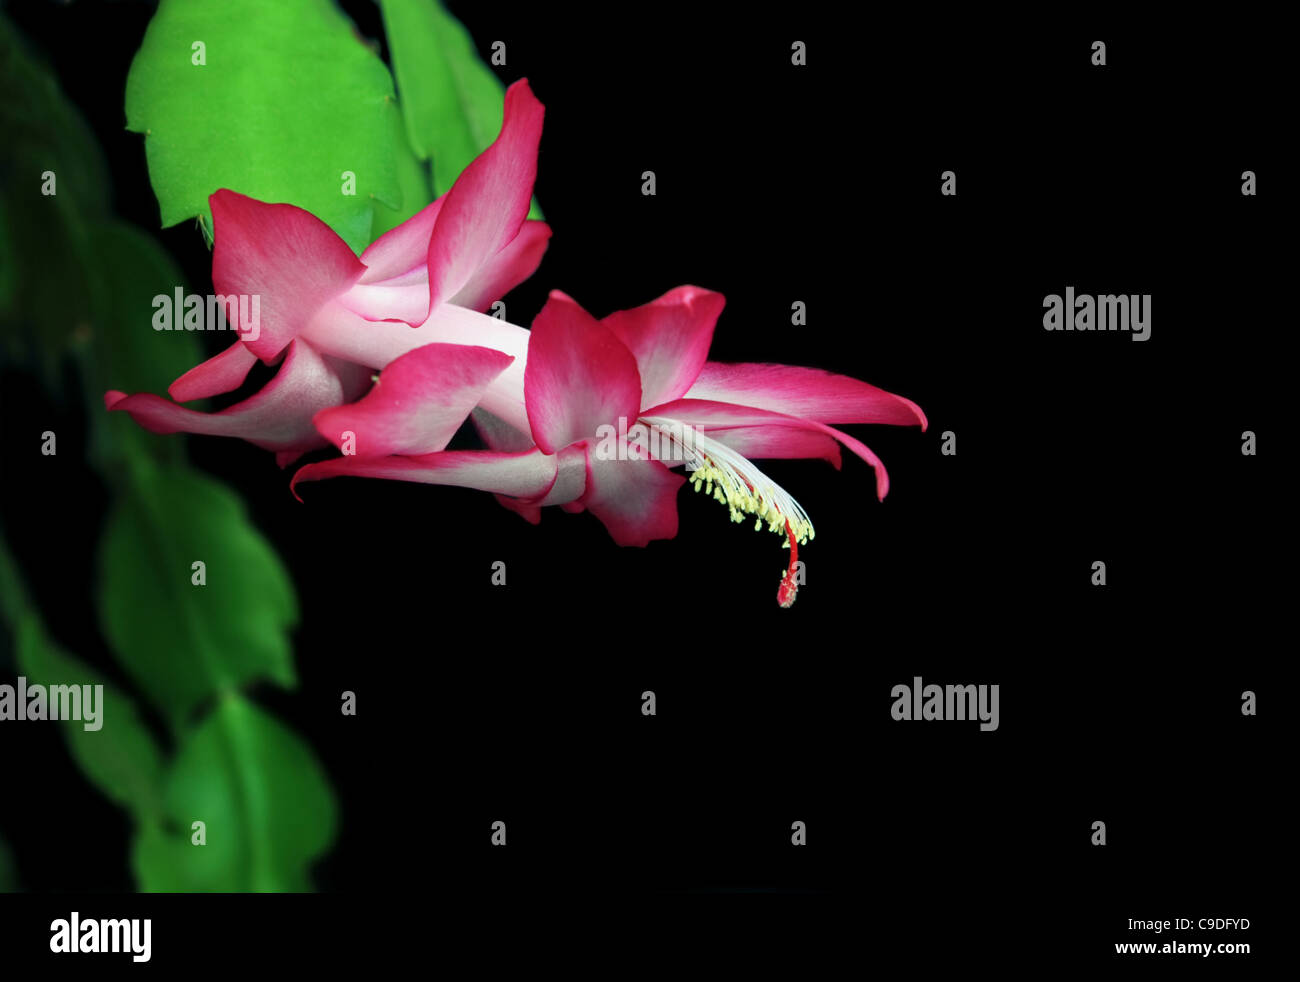 pink and white christmas cactus flower with dark background Stock Photo